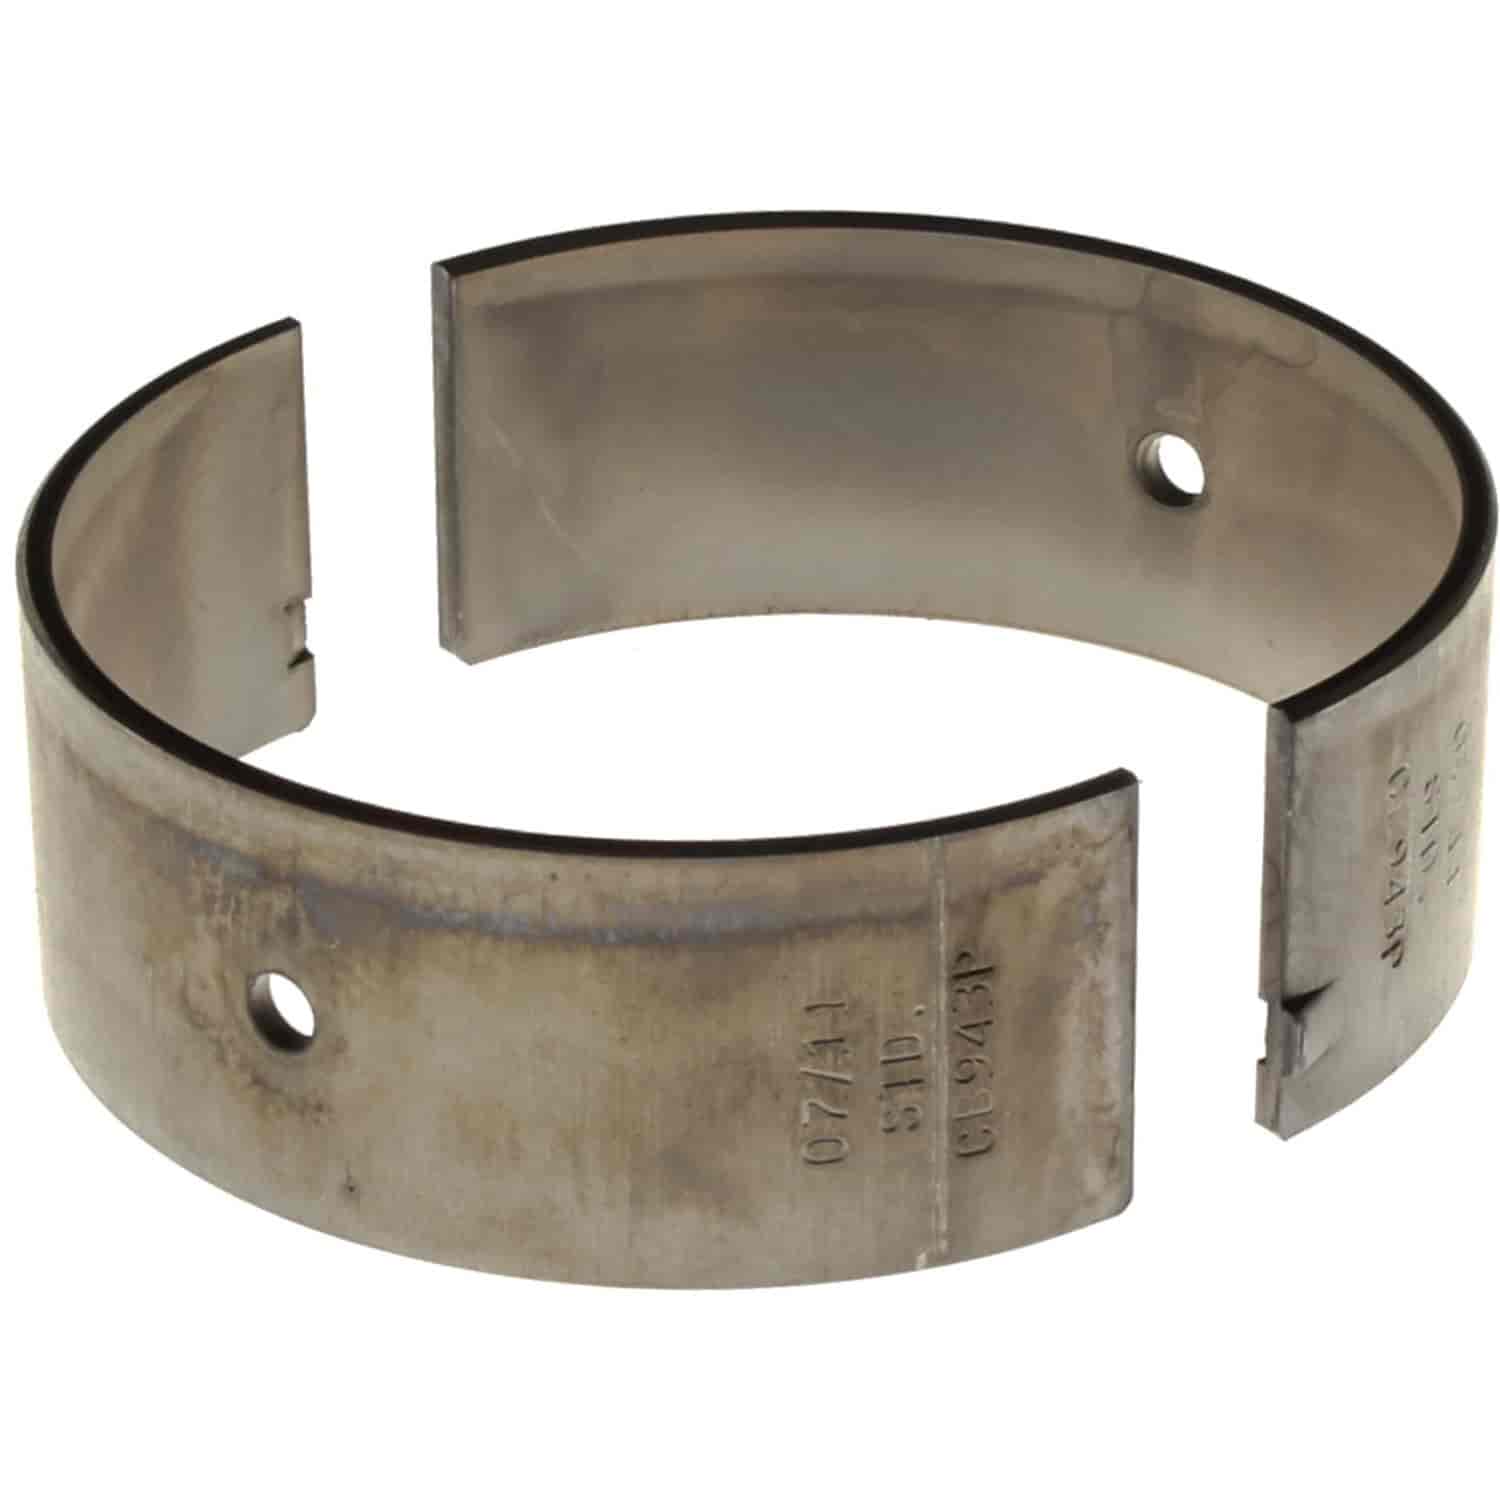 Connecting Rod Bearing Ford 1971-1974 L4 2.0L with Standard Size